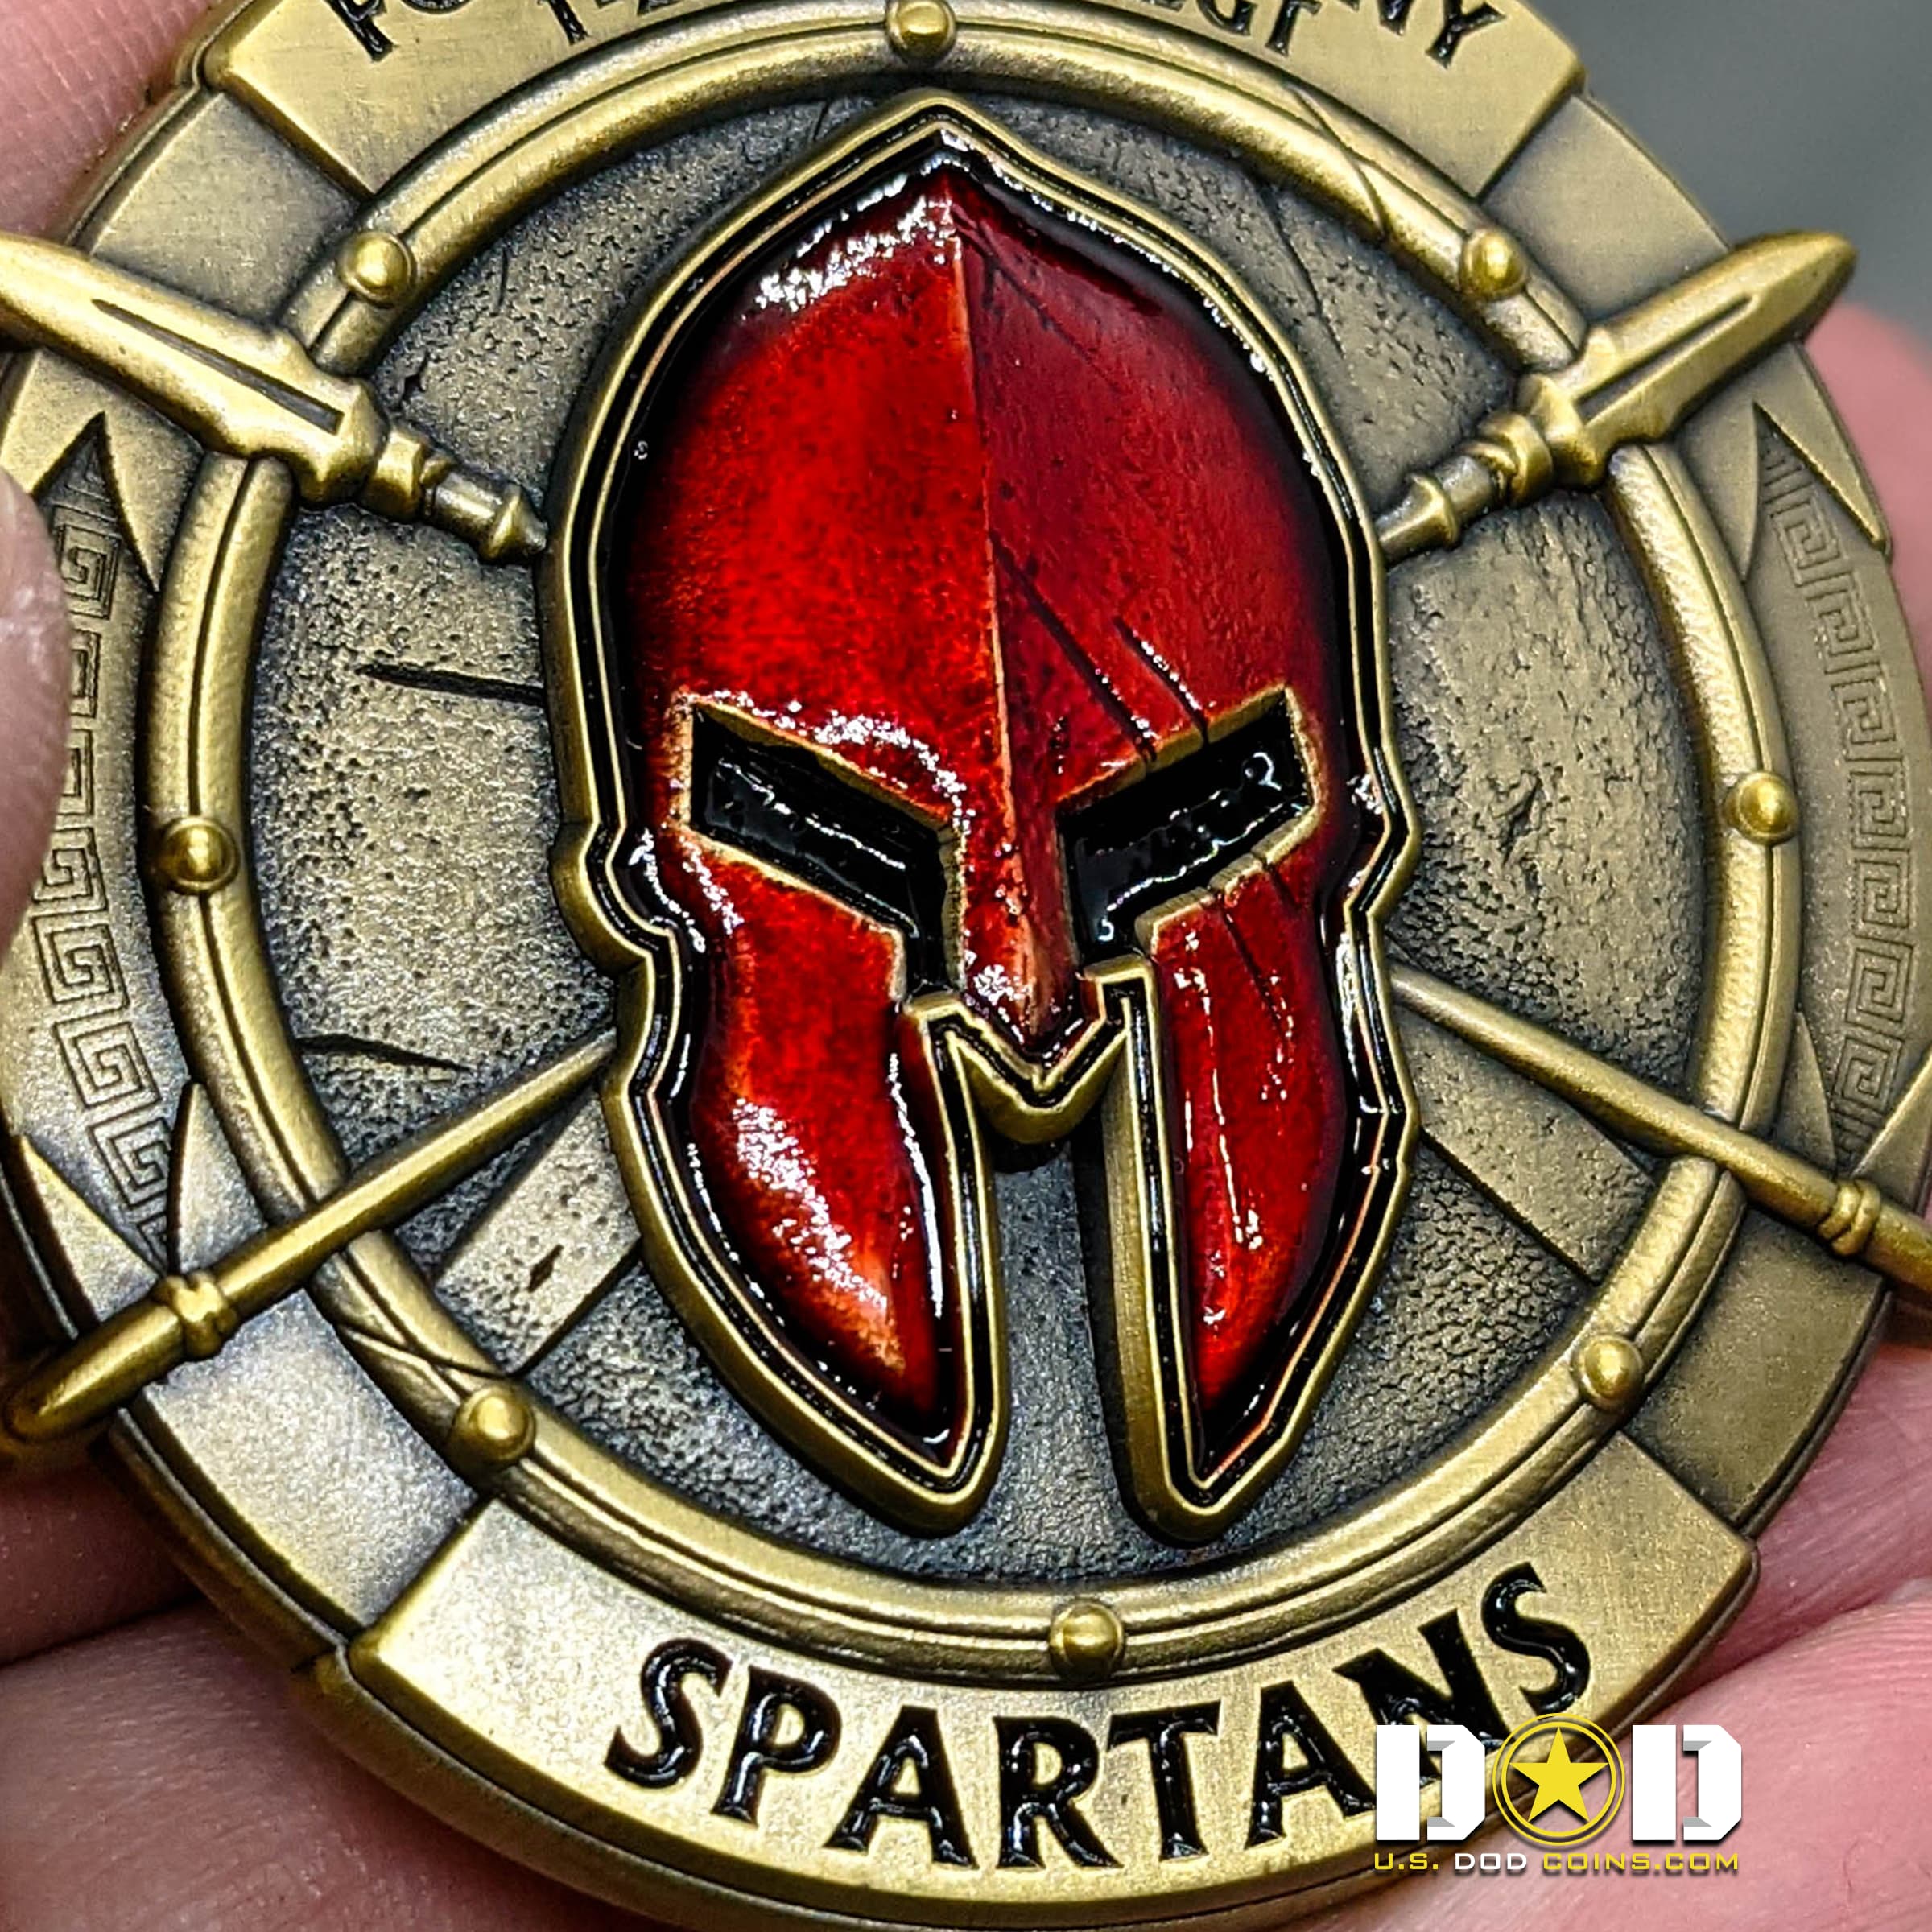 Foxtrot-Company-Spartan-Challenge-Coin_0000_USDODCoins-Challenge-Coins-Examples-92